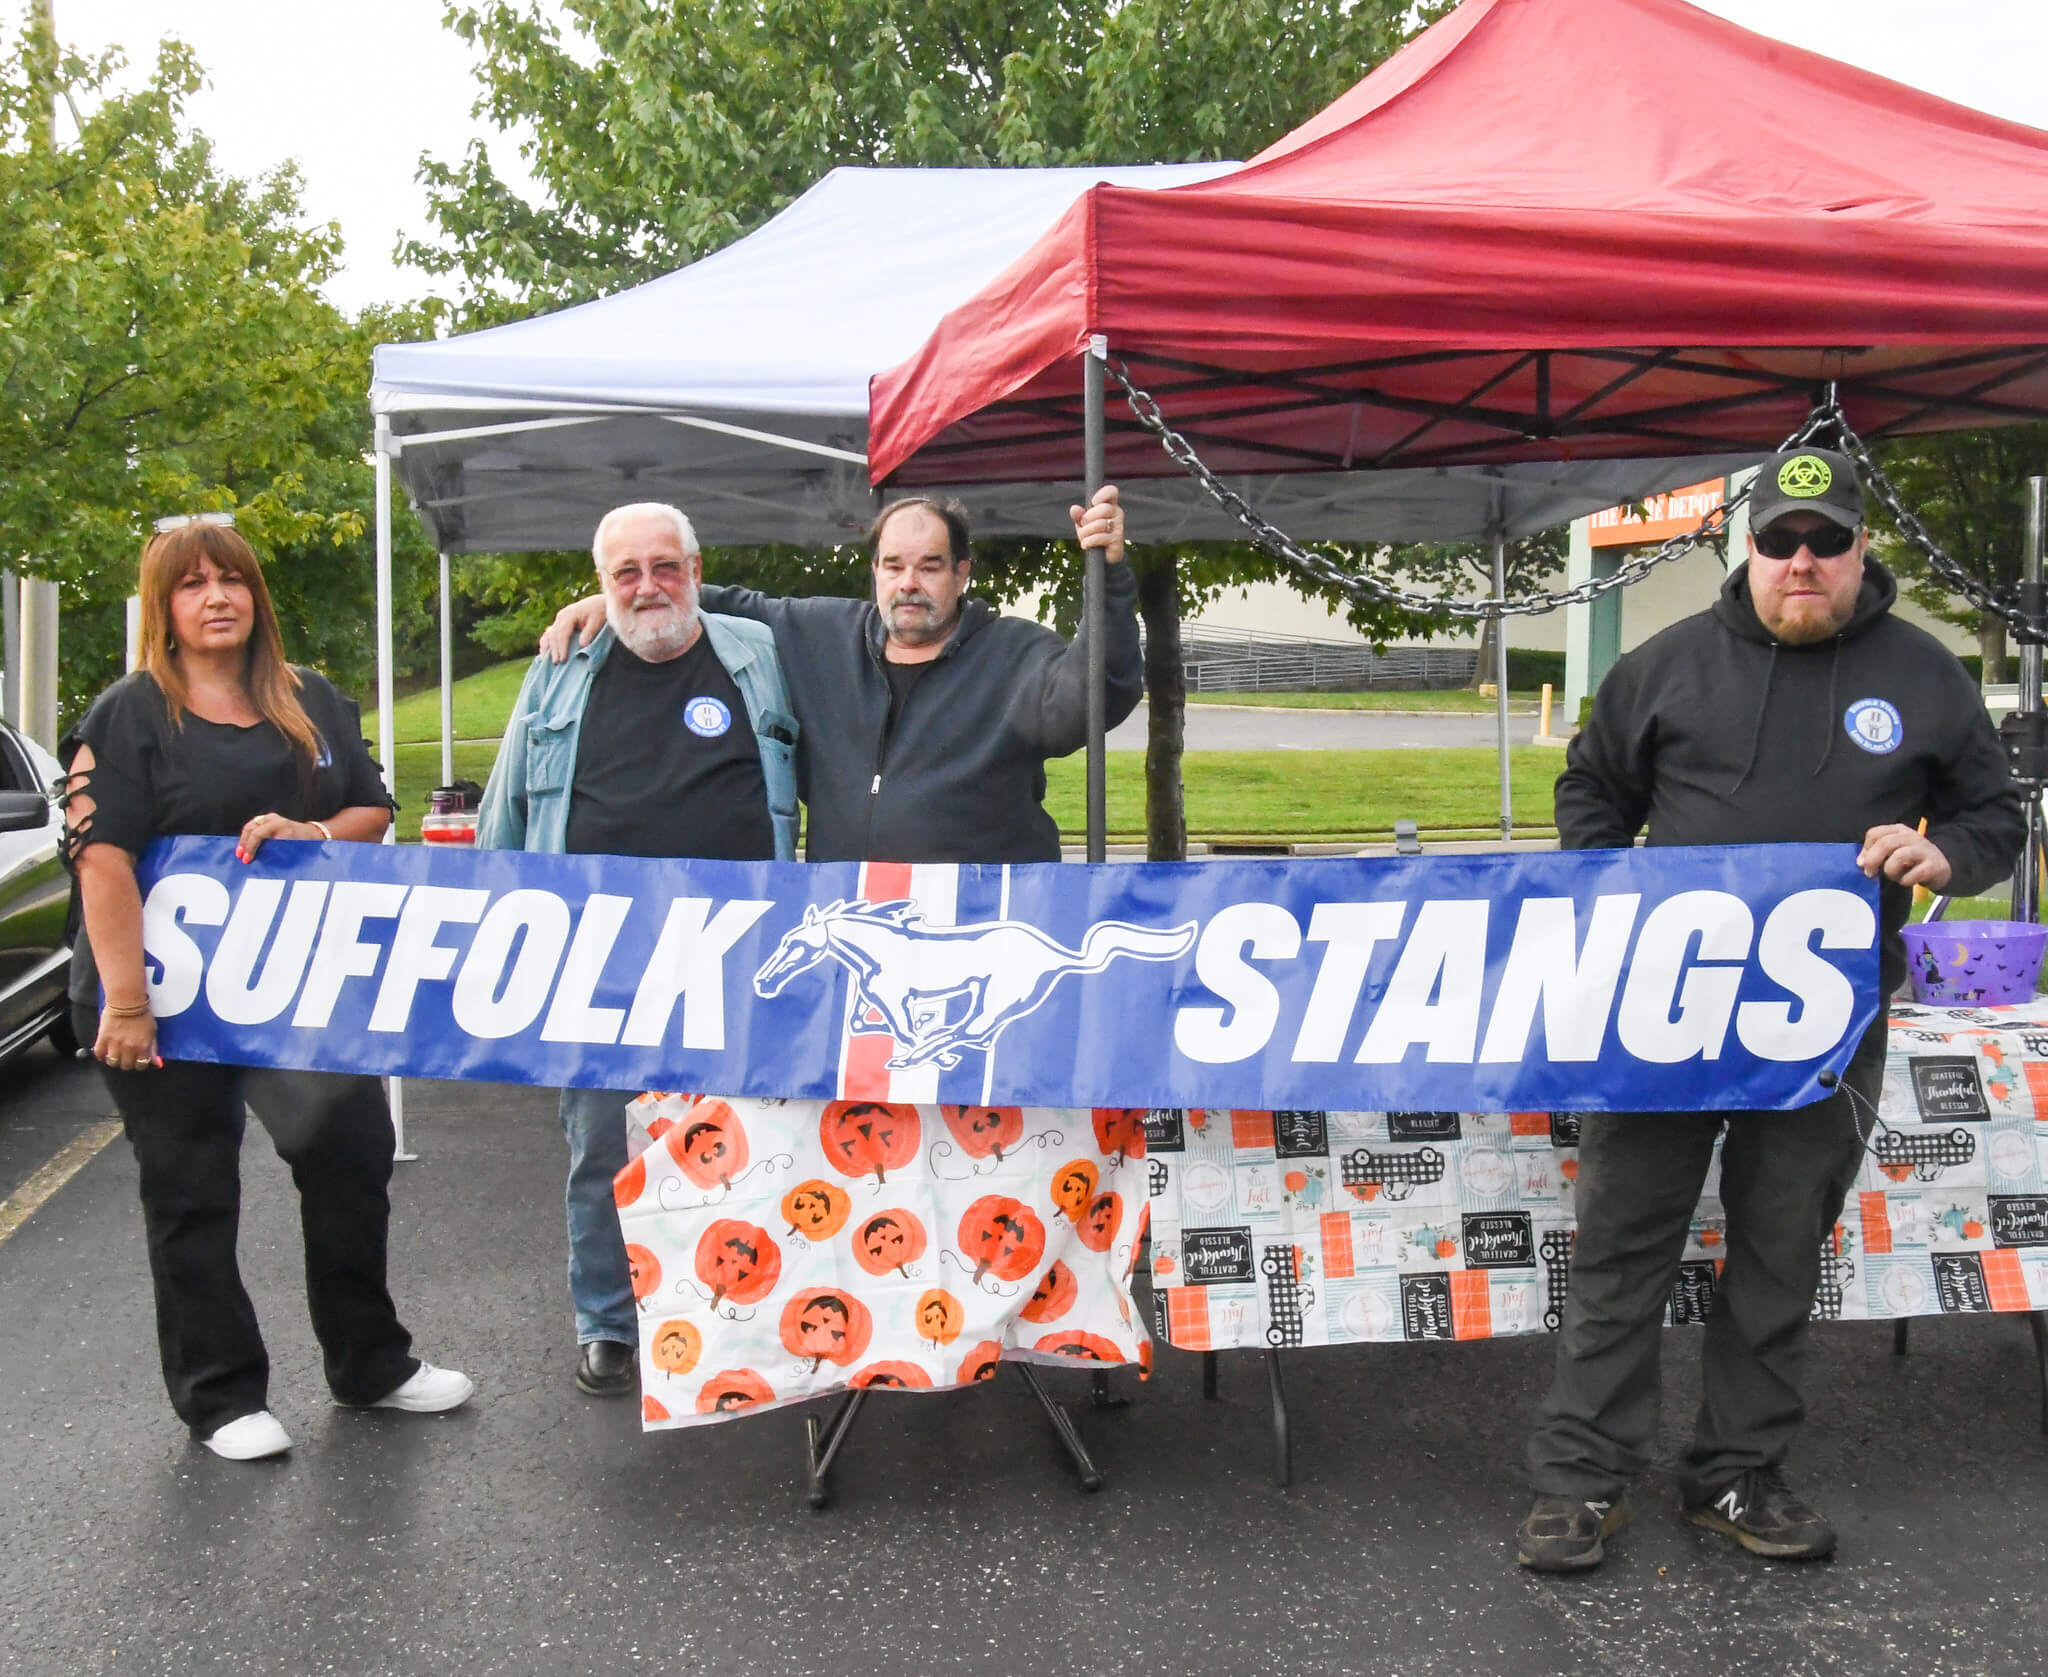 Image 6 Annie Mcleod Bob Glaser Ricky Catrini Greg Grabowski from the Suffolk Stangs Long Island